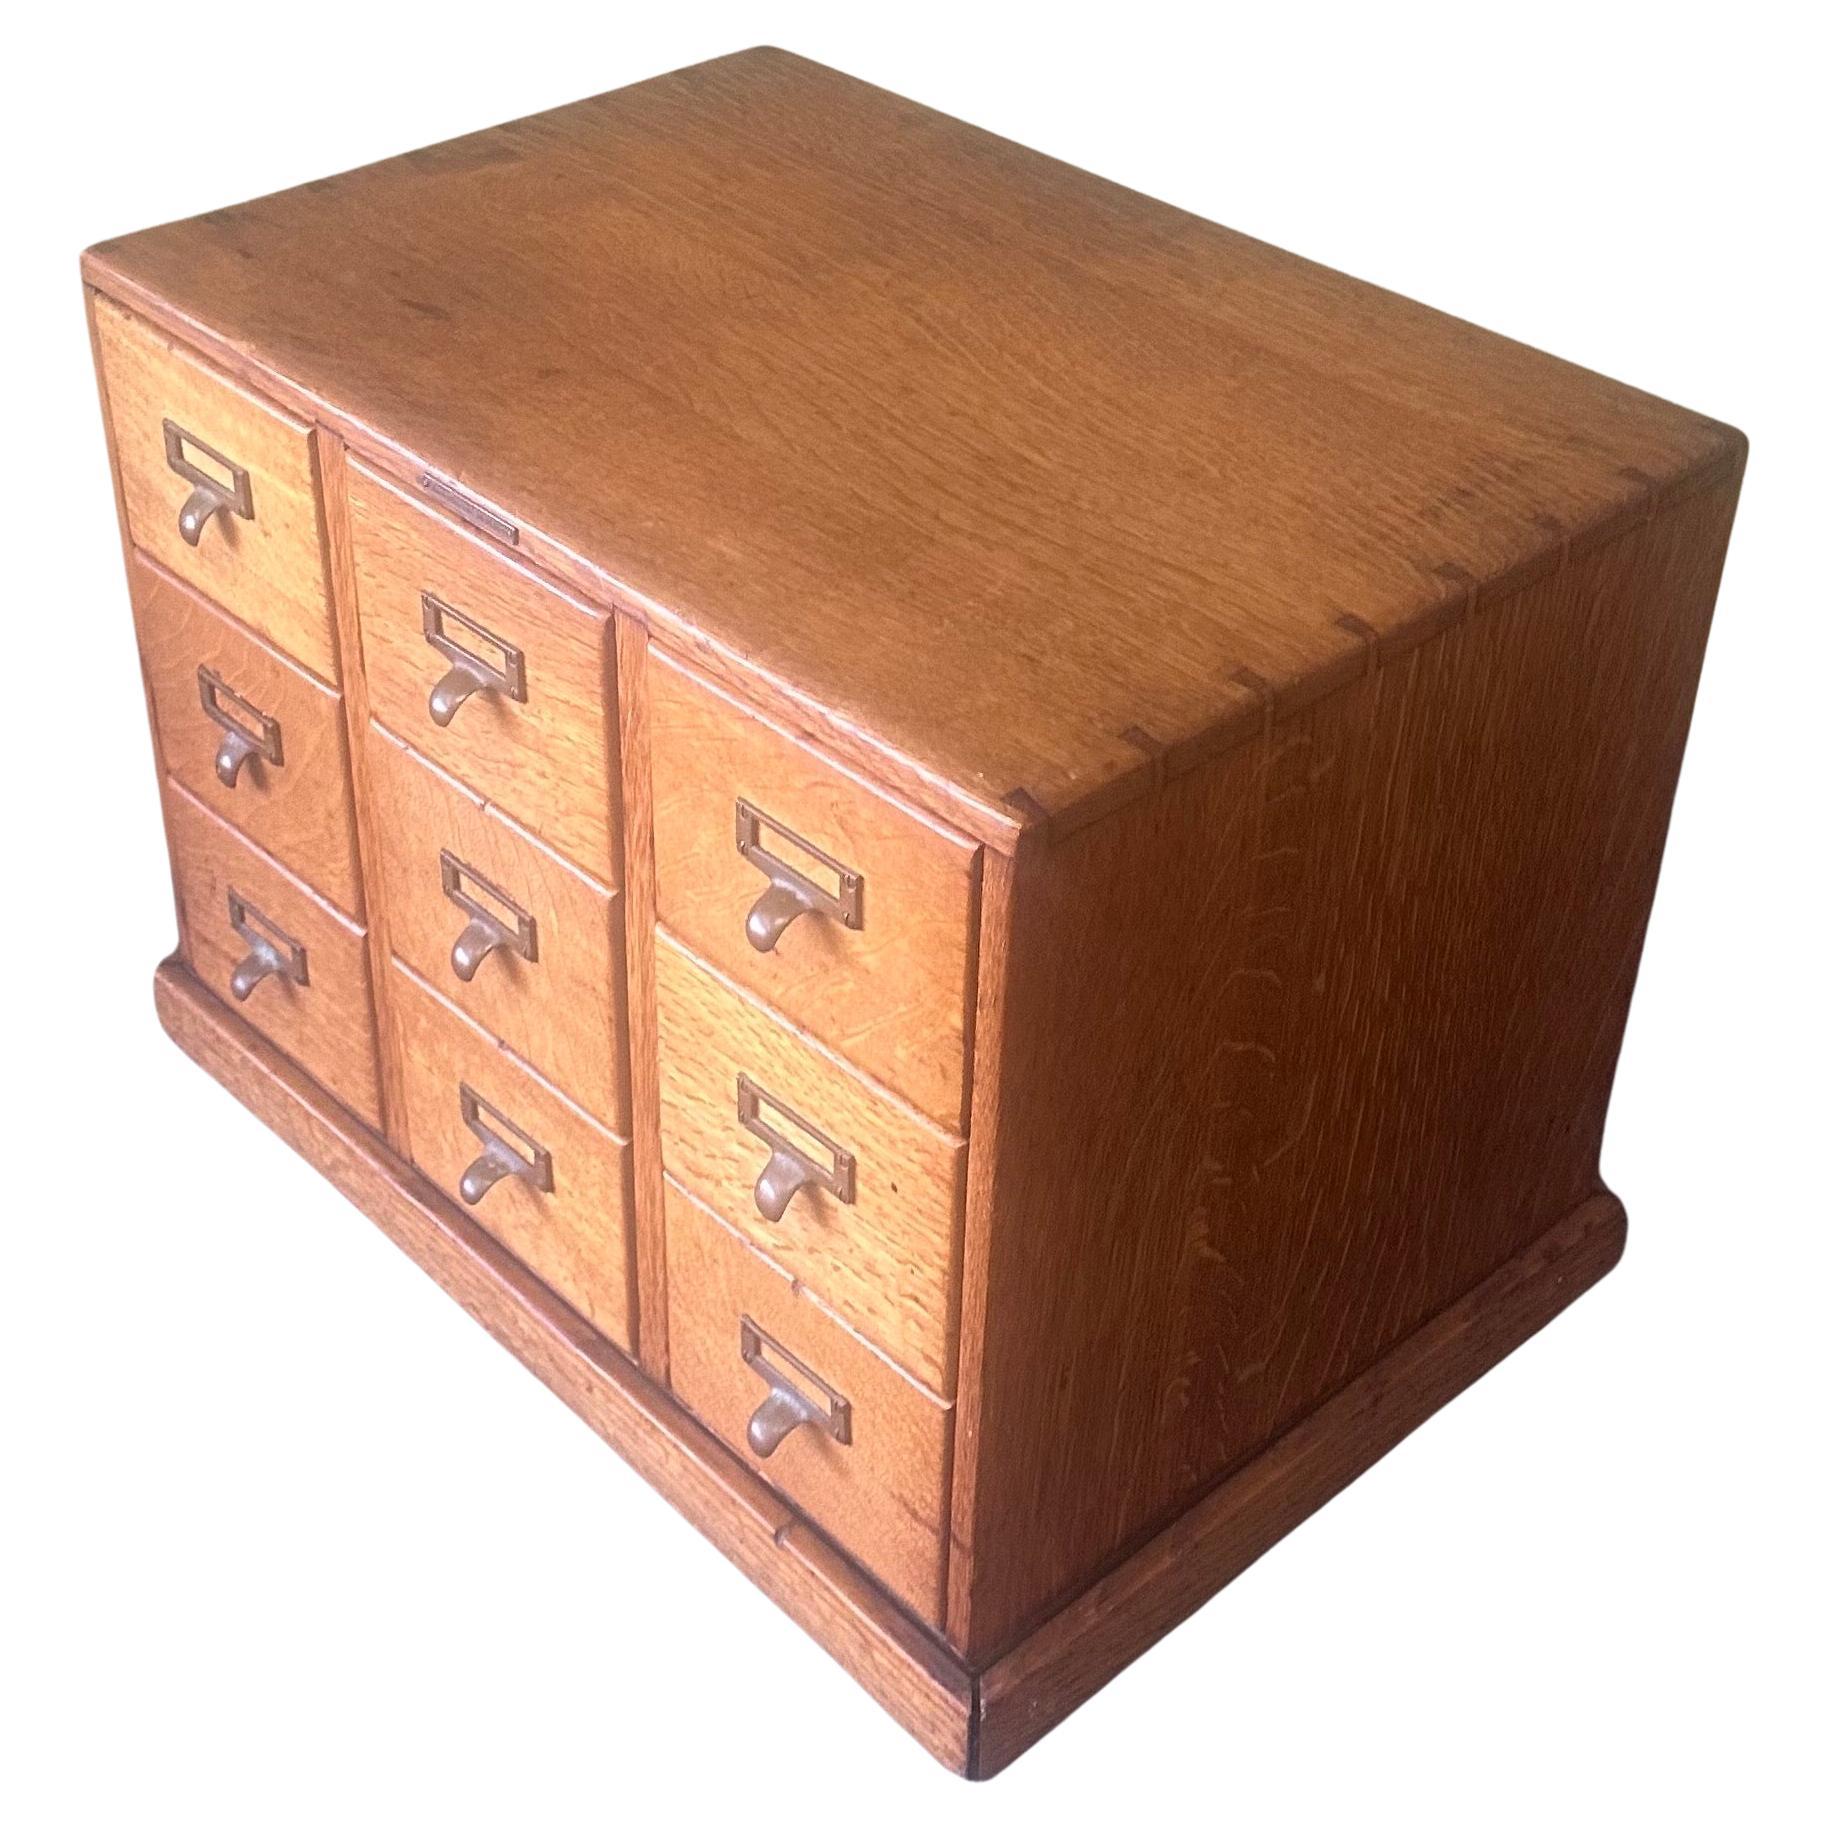 A very nice nine drawer library card catalog in quarter sawn oak by Library Bureau Sole Makers, circa 1950s. The piece is in very good vintage condition and finished on all sides with brass hardware pulls. It measures approximately 23.75